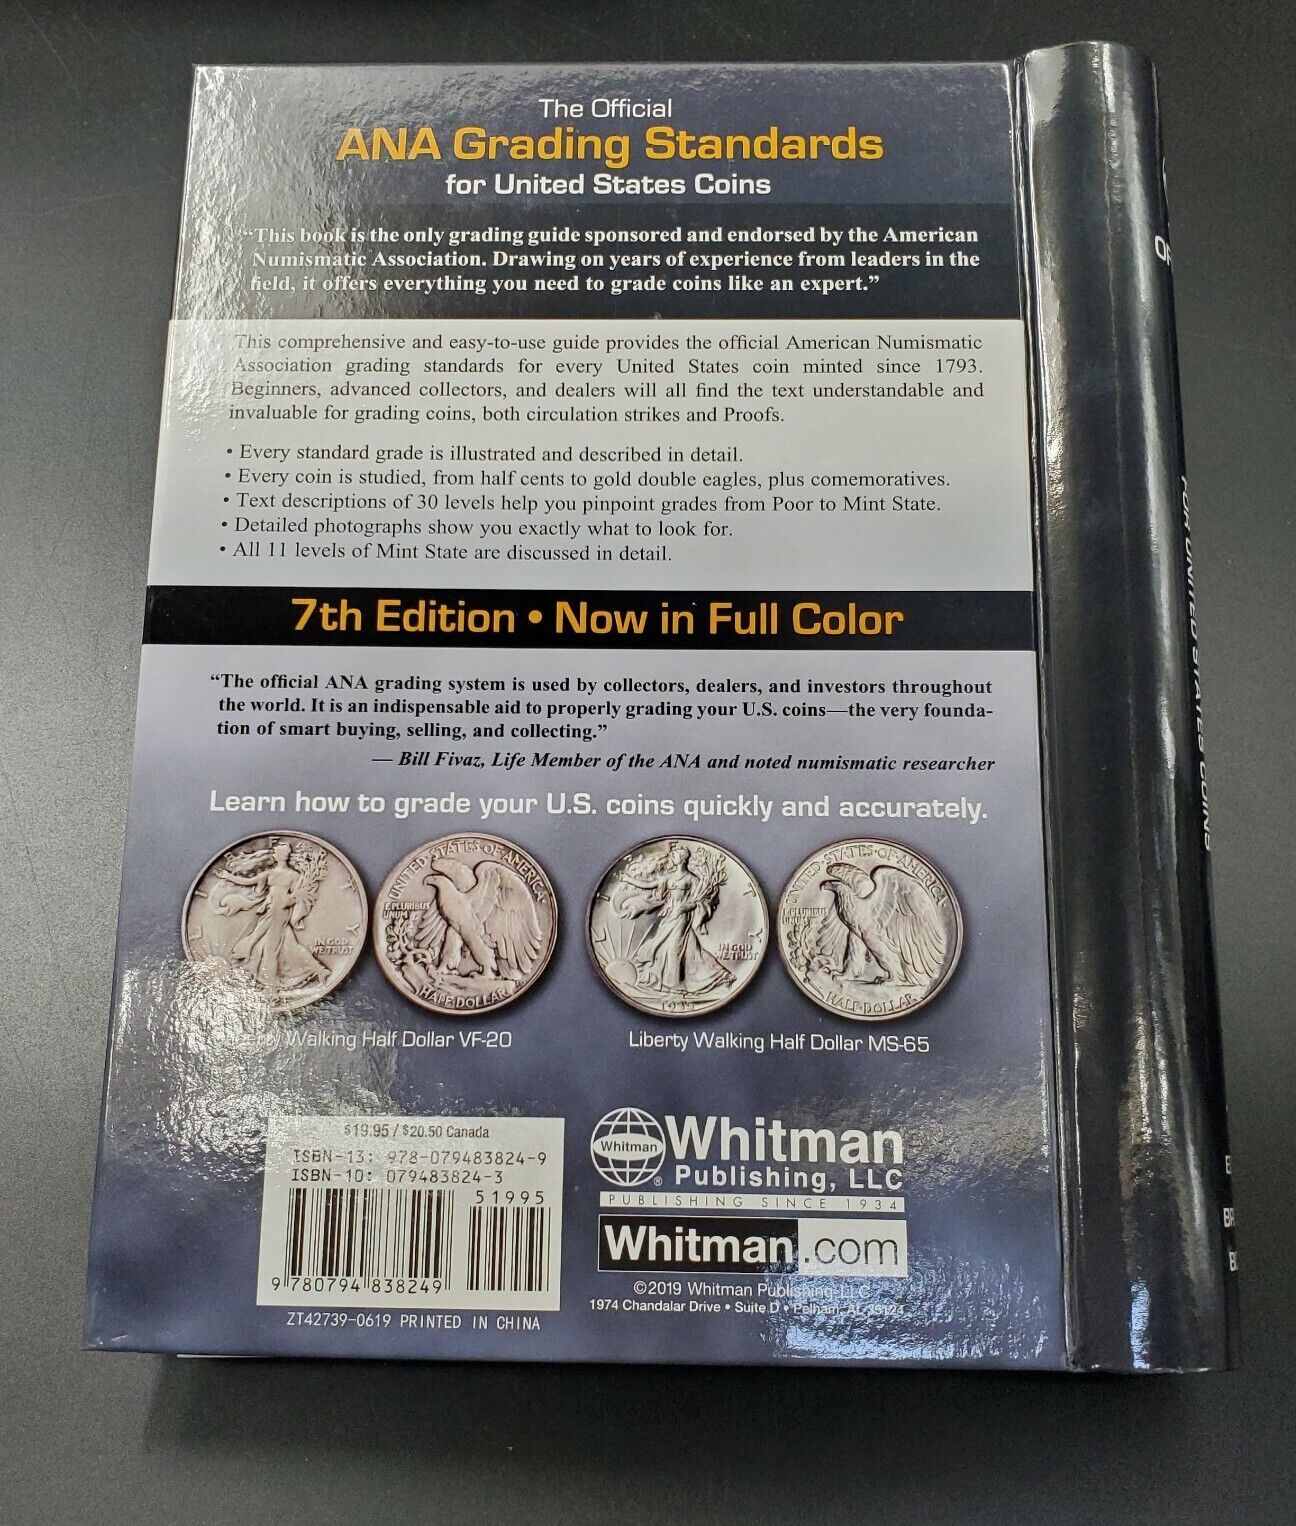 The Official ANA Grading Standards for United States Coins, 7th Edition